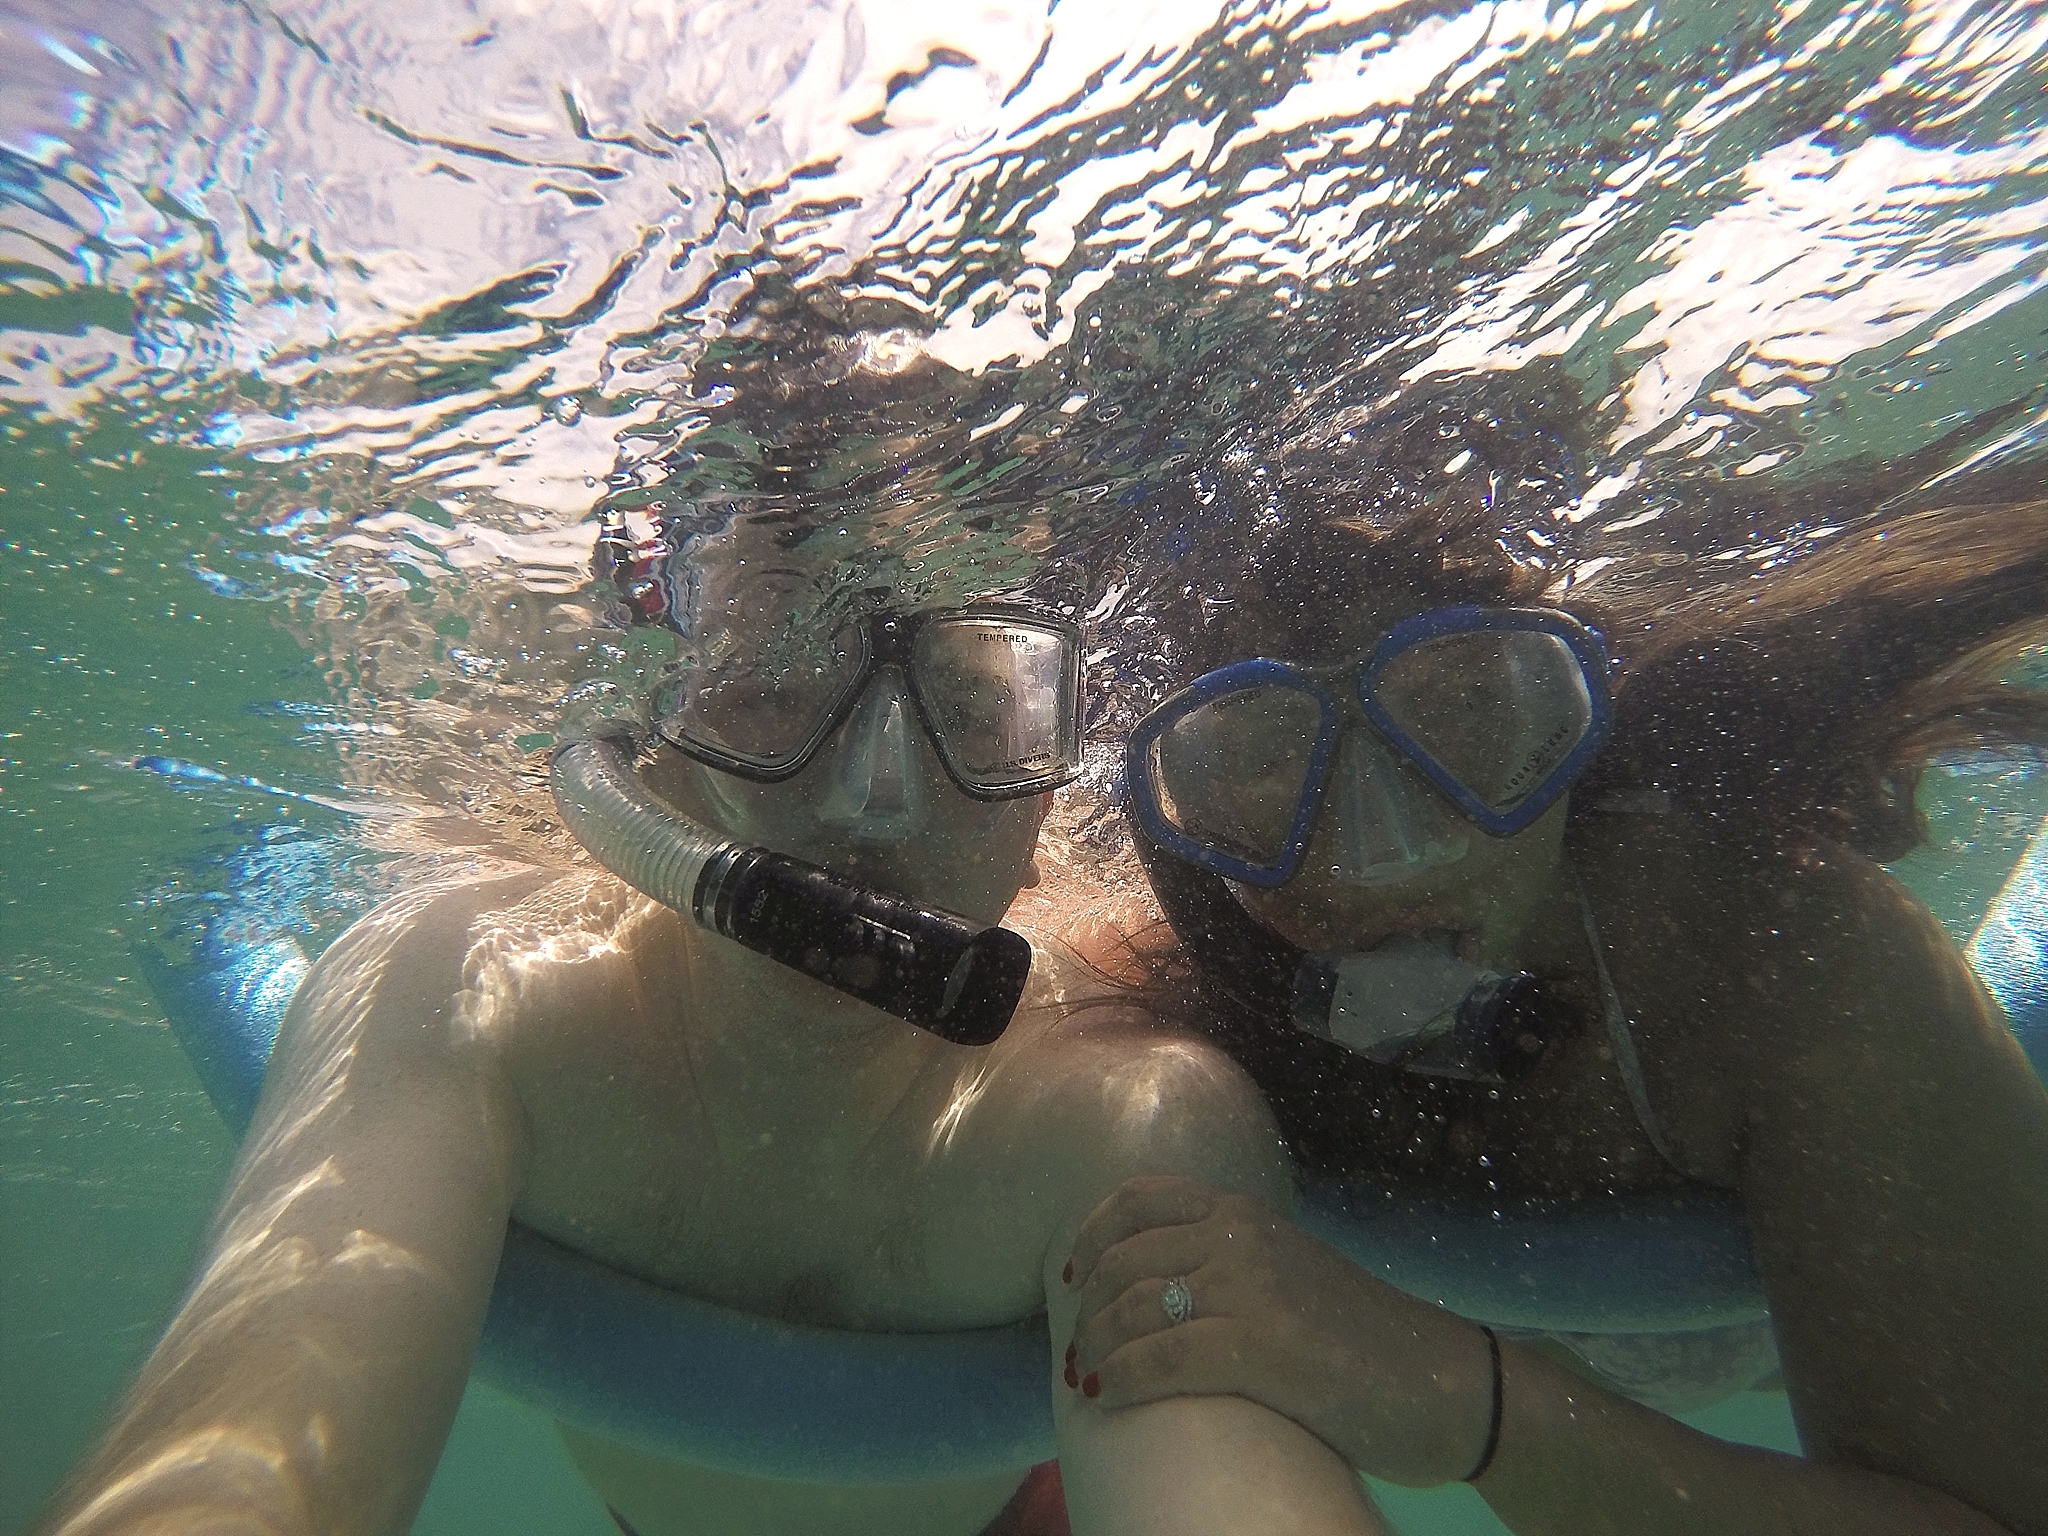 John and Brittney Naylor with goggles and snorkel on underwater in Maui Hawaii